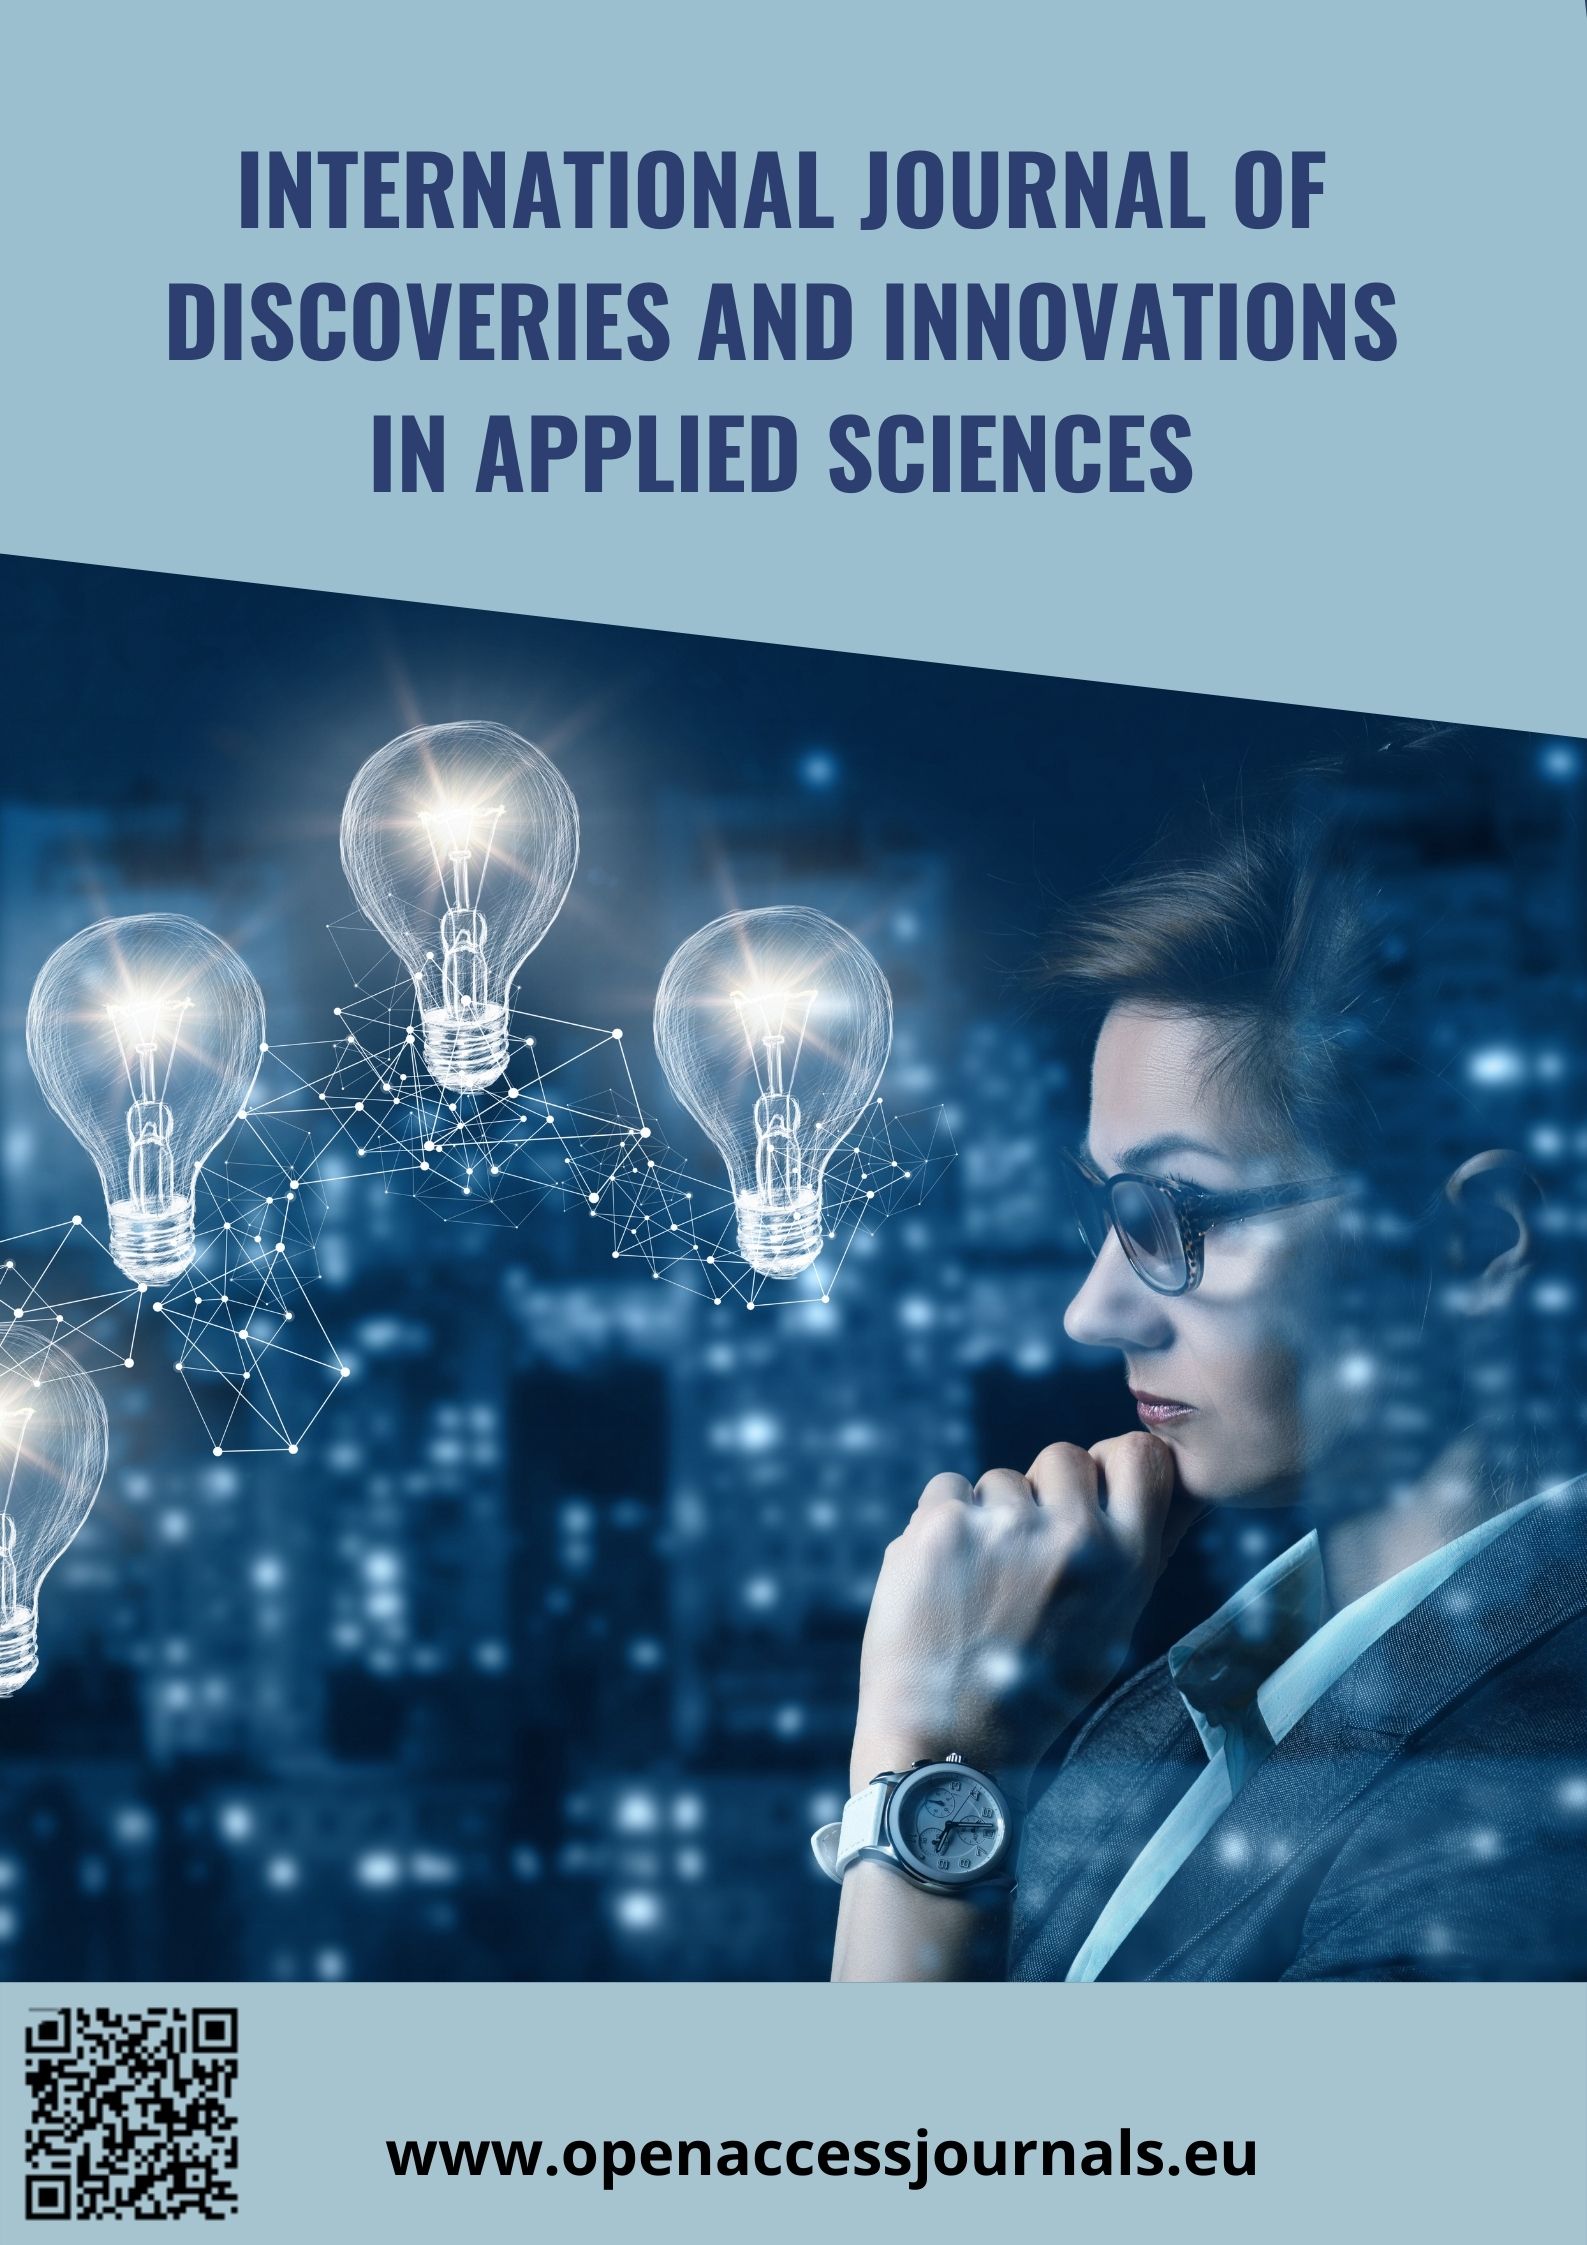 International Journal of Discoveries and Innovations in Applied Sciences